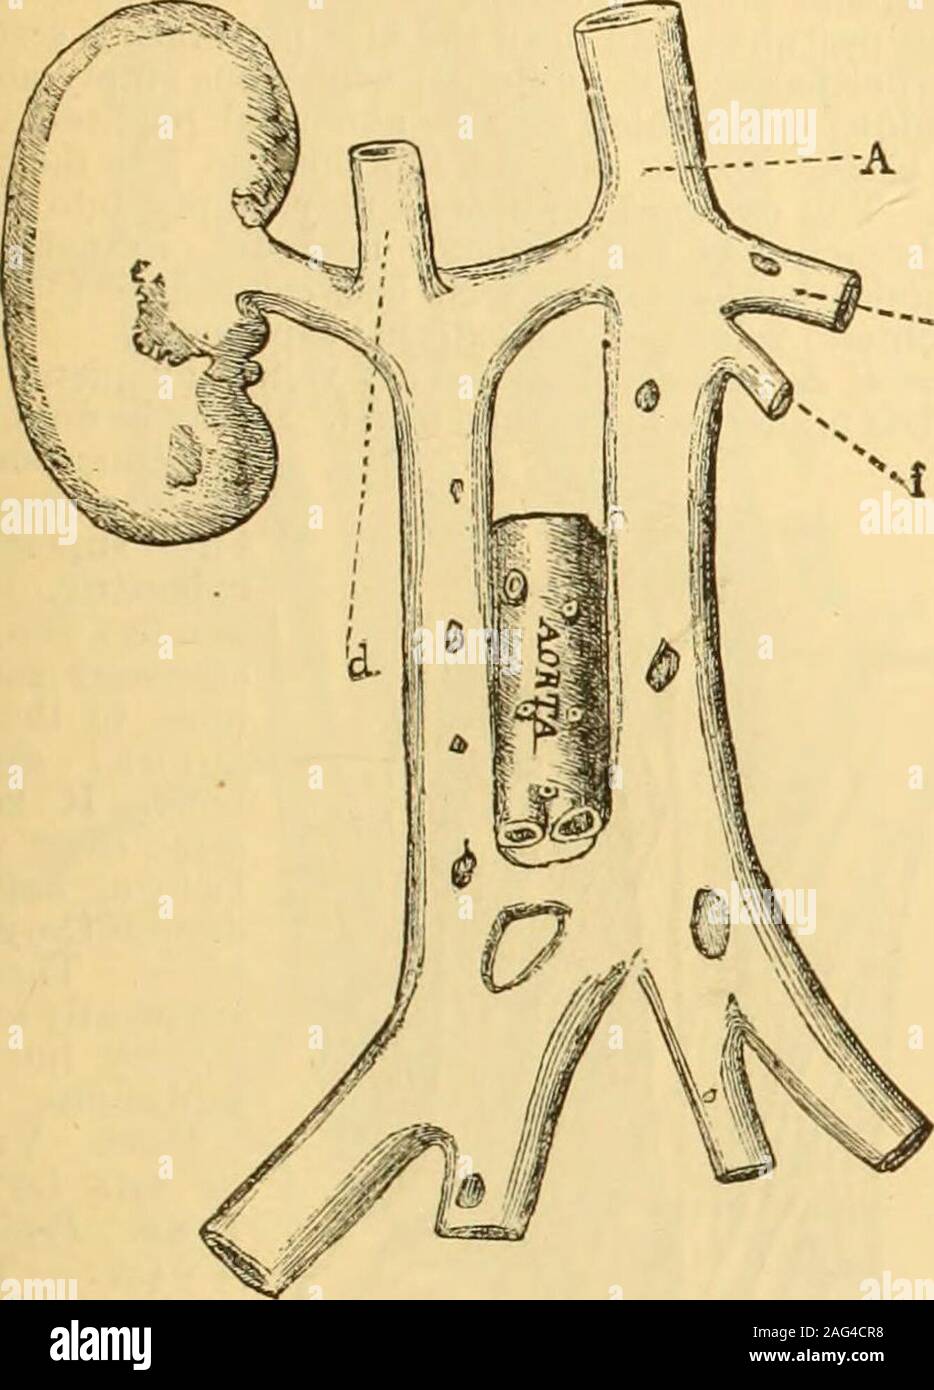 . A Reference handbook of the medical sciences : embracing the entire range of scientific and practical medicine and allied science. Fig. 4515.—The In-ferior Cava con- 608 REFERENCE HANDBOOK OF THE MEDICAL SCIENCES. Veins.Veins. vein has the usual mode of termination in the heart; (b)where it terminates in the superior vena cava. The common iliac veins may not join at the usualplace ; the left common iliac, after sending a branch acrossto join the right, may pass up on the left side of the aorta. —e Fio. 451G.—Case of Double Inferior Vena Cava, the two Common Iliacsbeing joineil by a Transvers Stock Photo